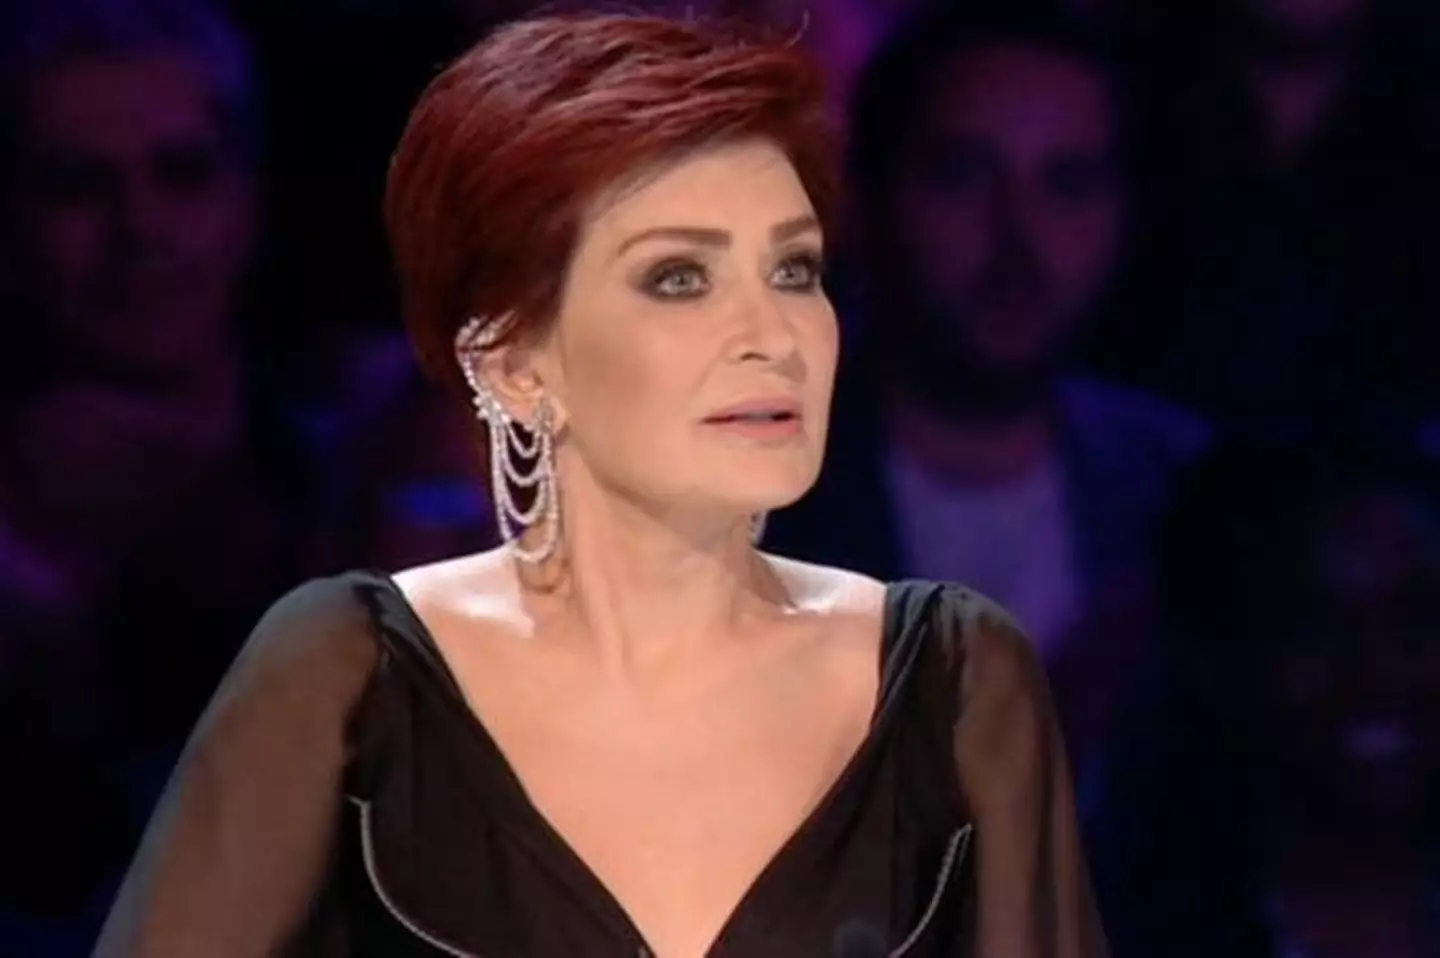 Sharon Osbourne said she had side effects after taking a weight loss drug